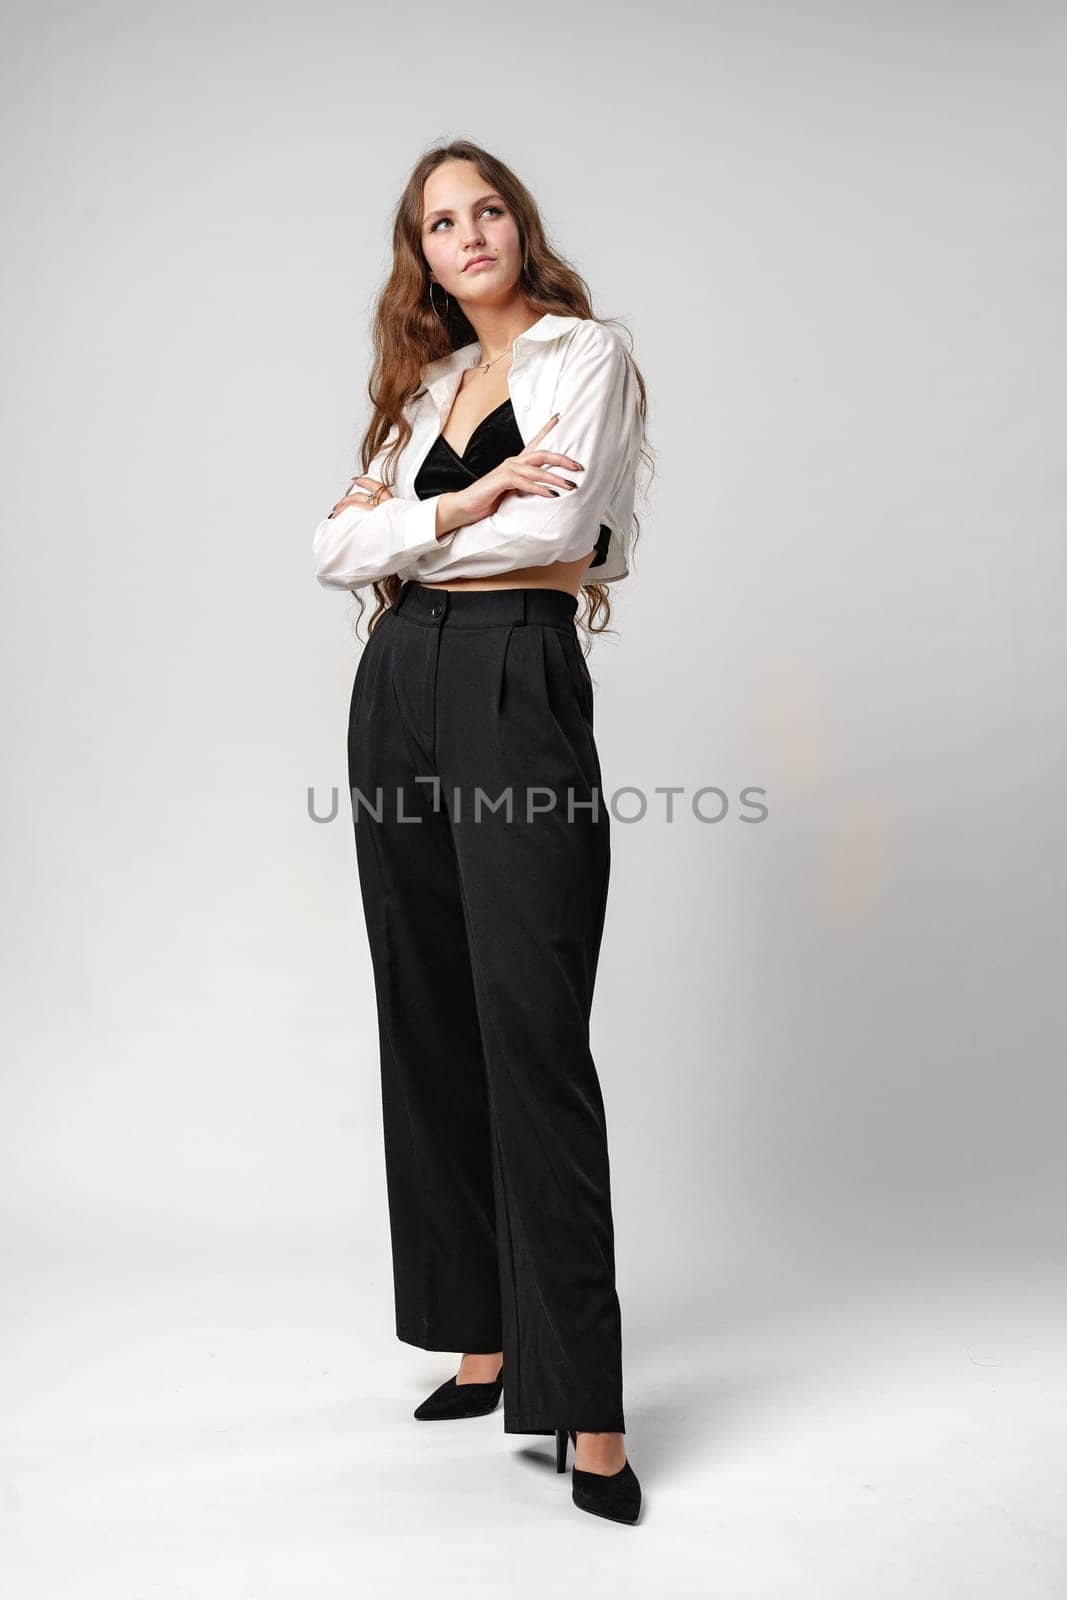 A woman is standing wearing a white shirt and black pants. She appears to be posing for a photograph or just enjoying a moment. The neutral colors of her outfit contrast nicely and create a simple yet classic look.